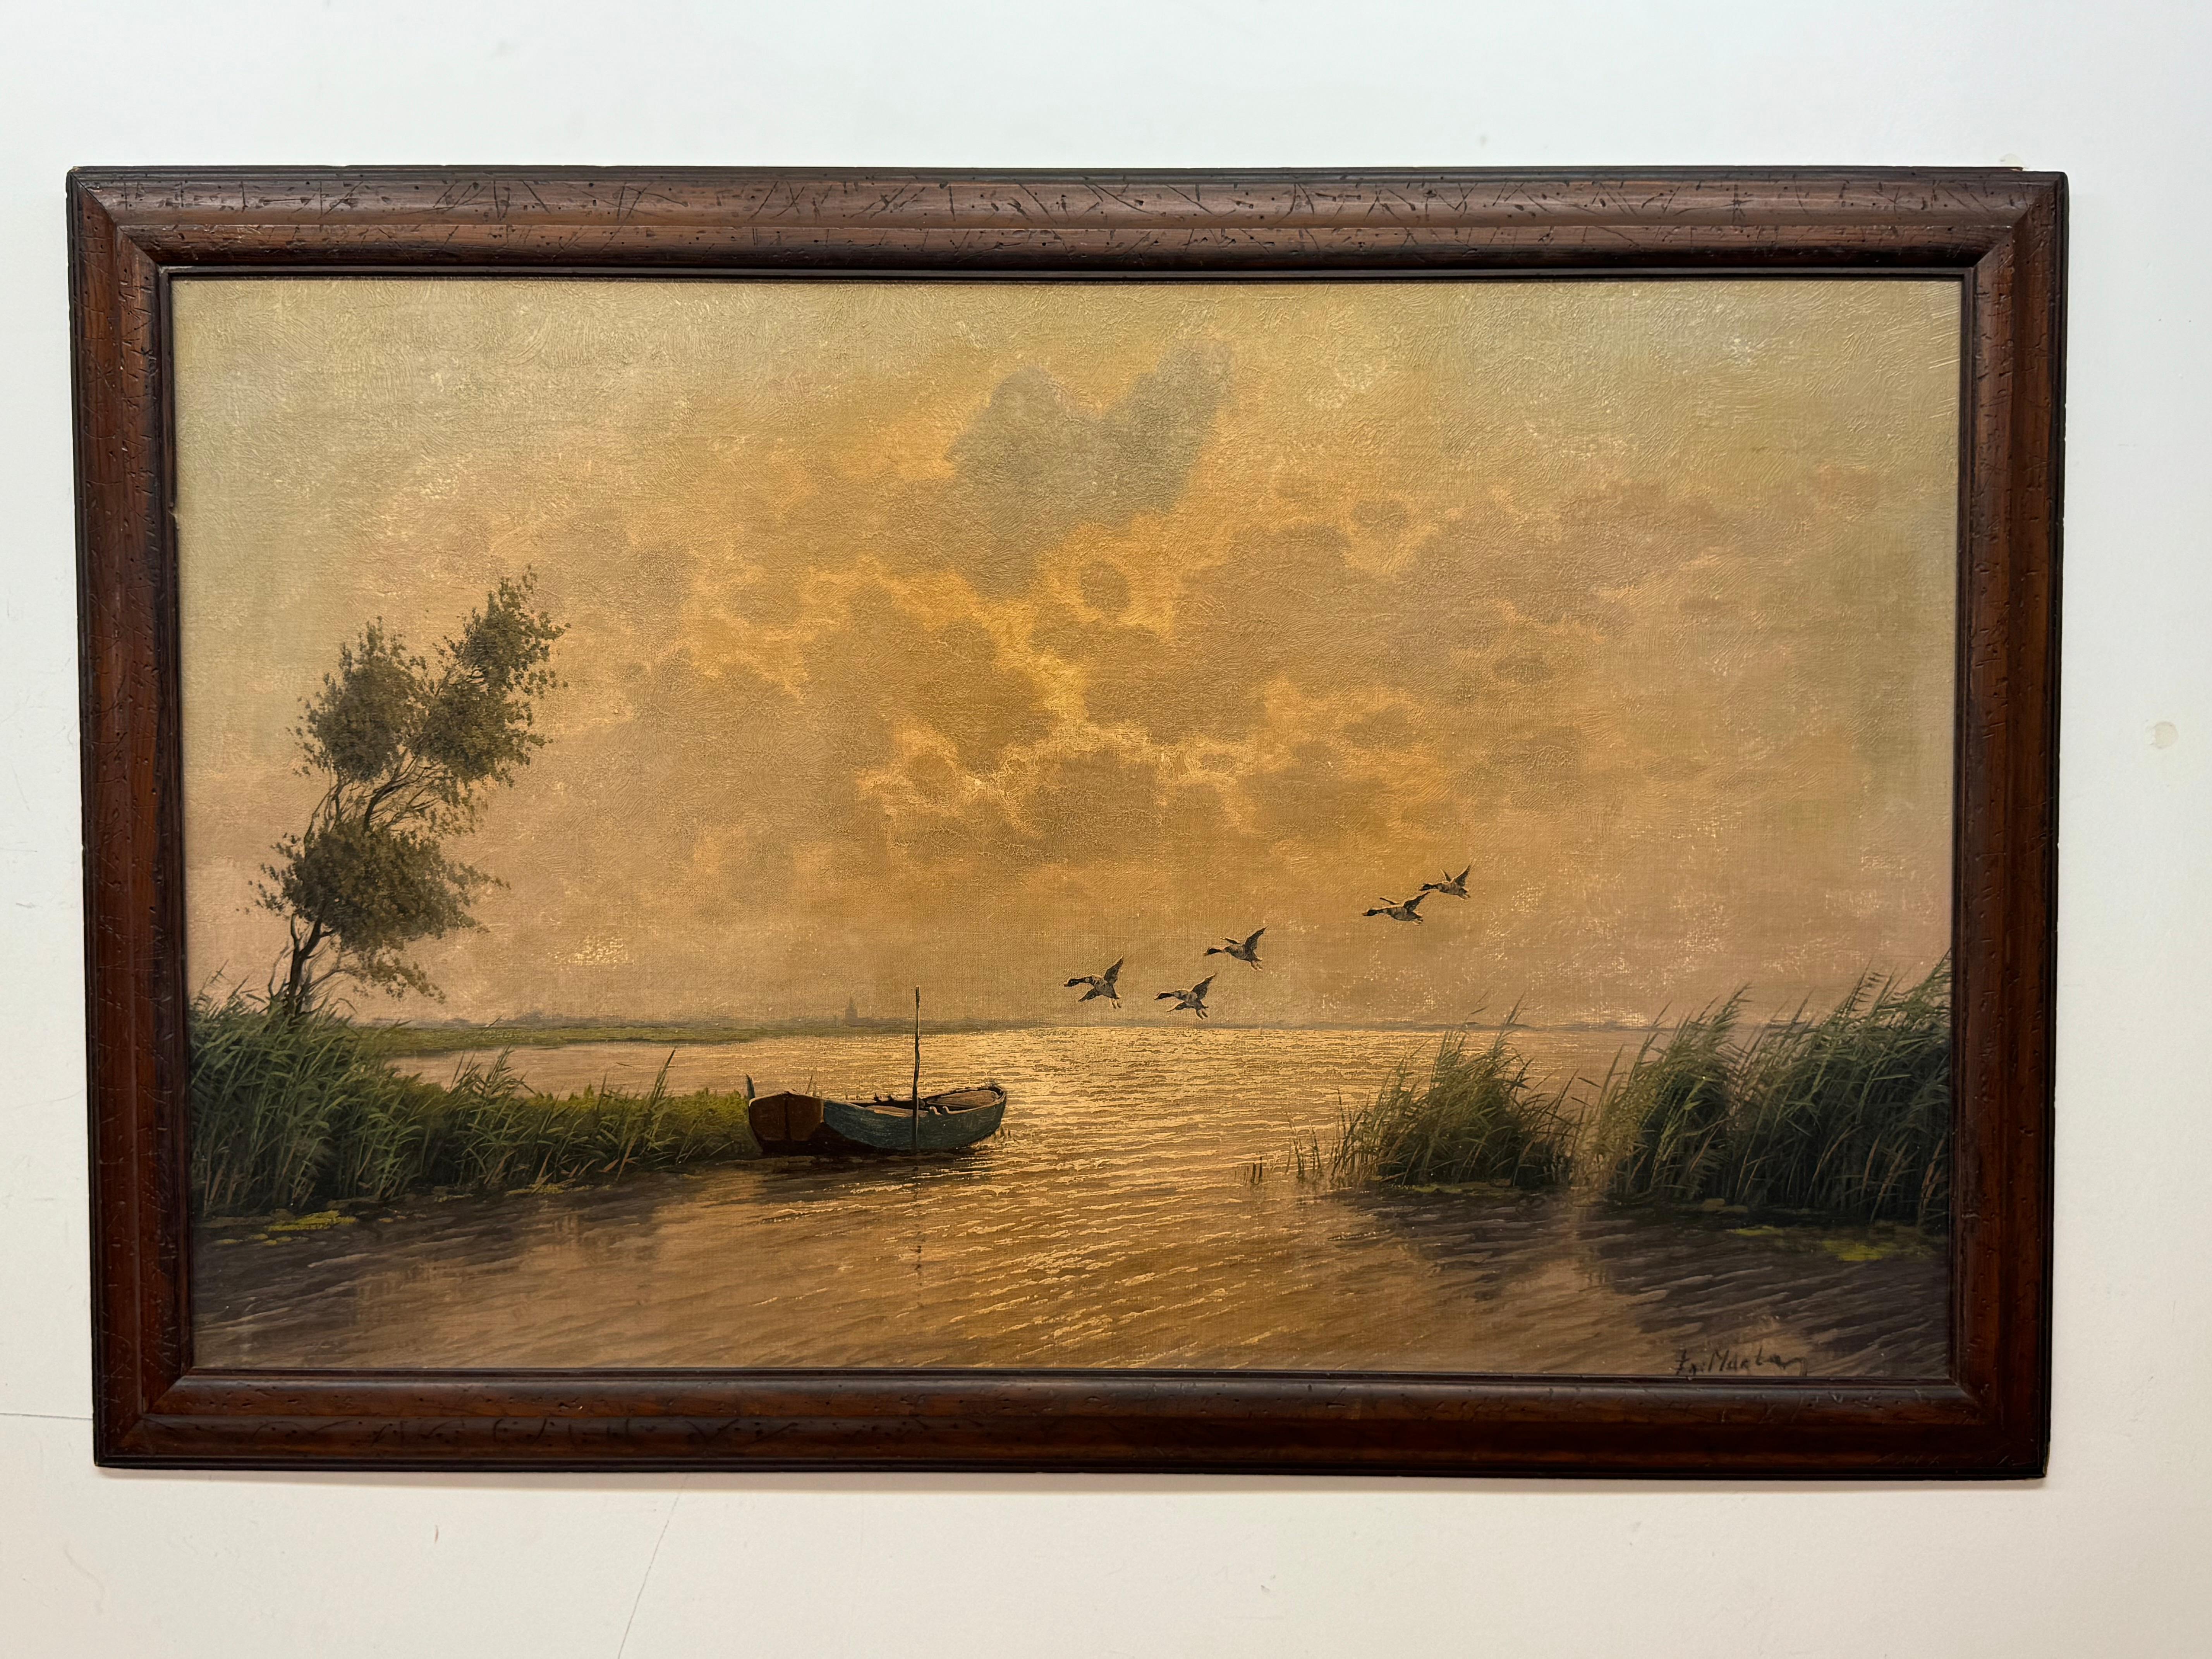 A Calm Landscape Painting with Ducks Flying Towards Small Boat at Sunset

Circa 1940's

25 x 40 unframed, 29.5 x 44 framed